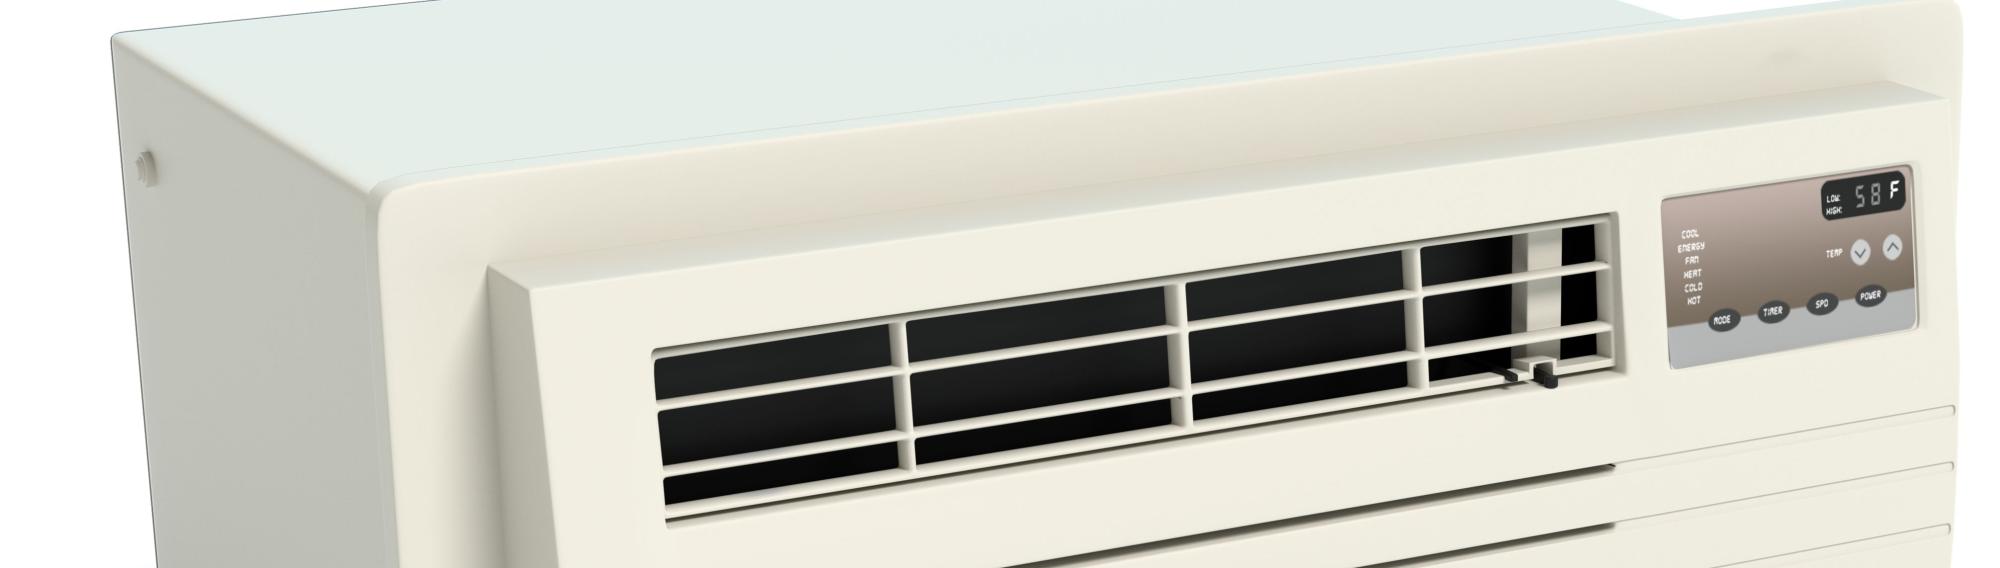 Image of an affordable ac unit from Superior Rent to Own